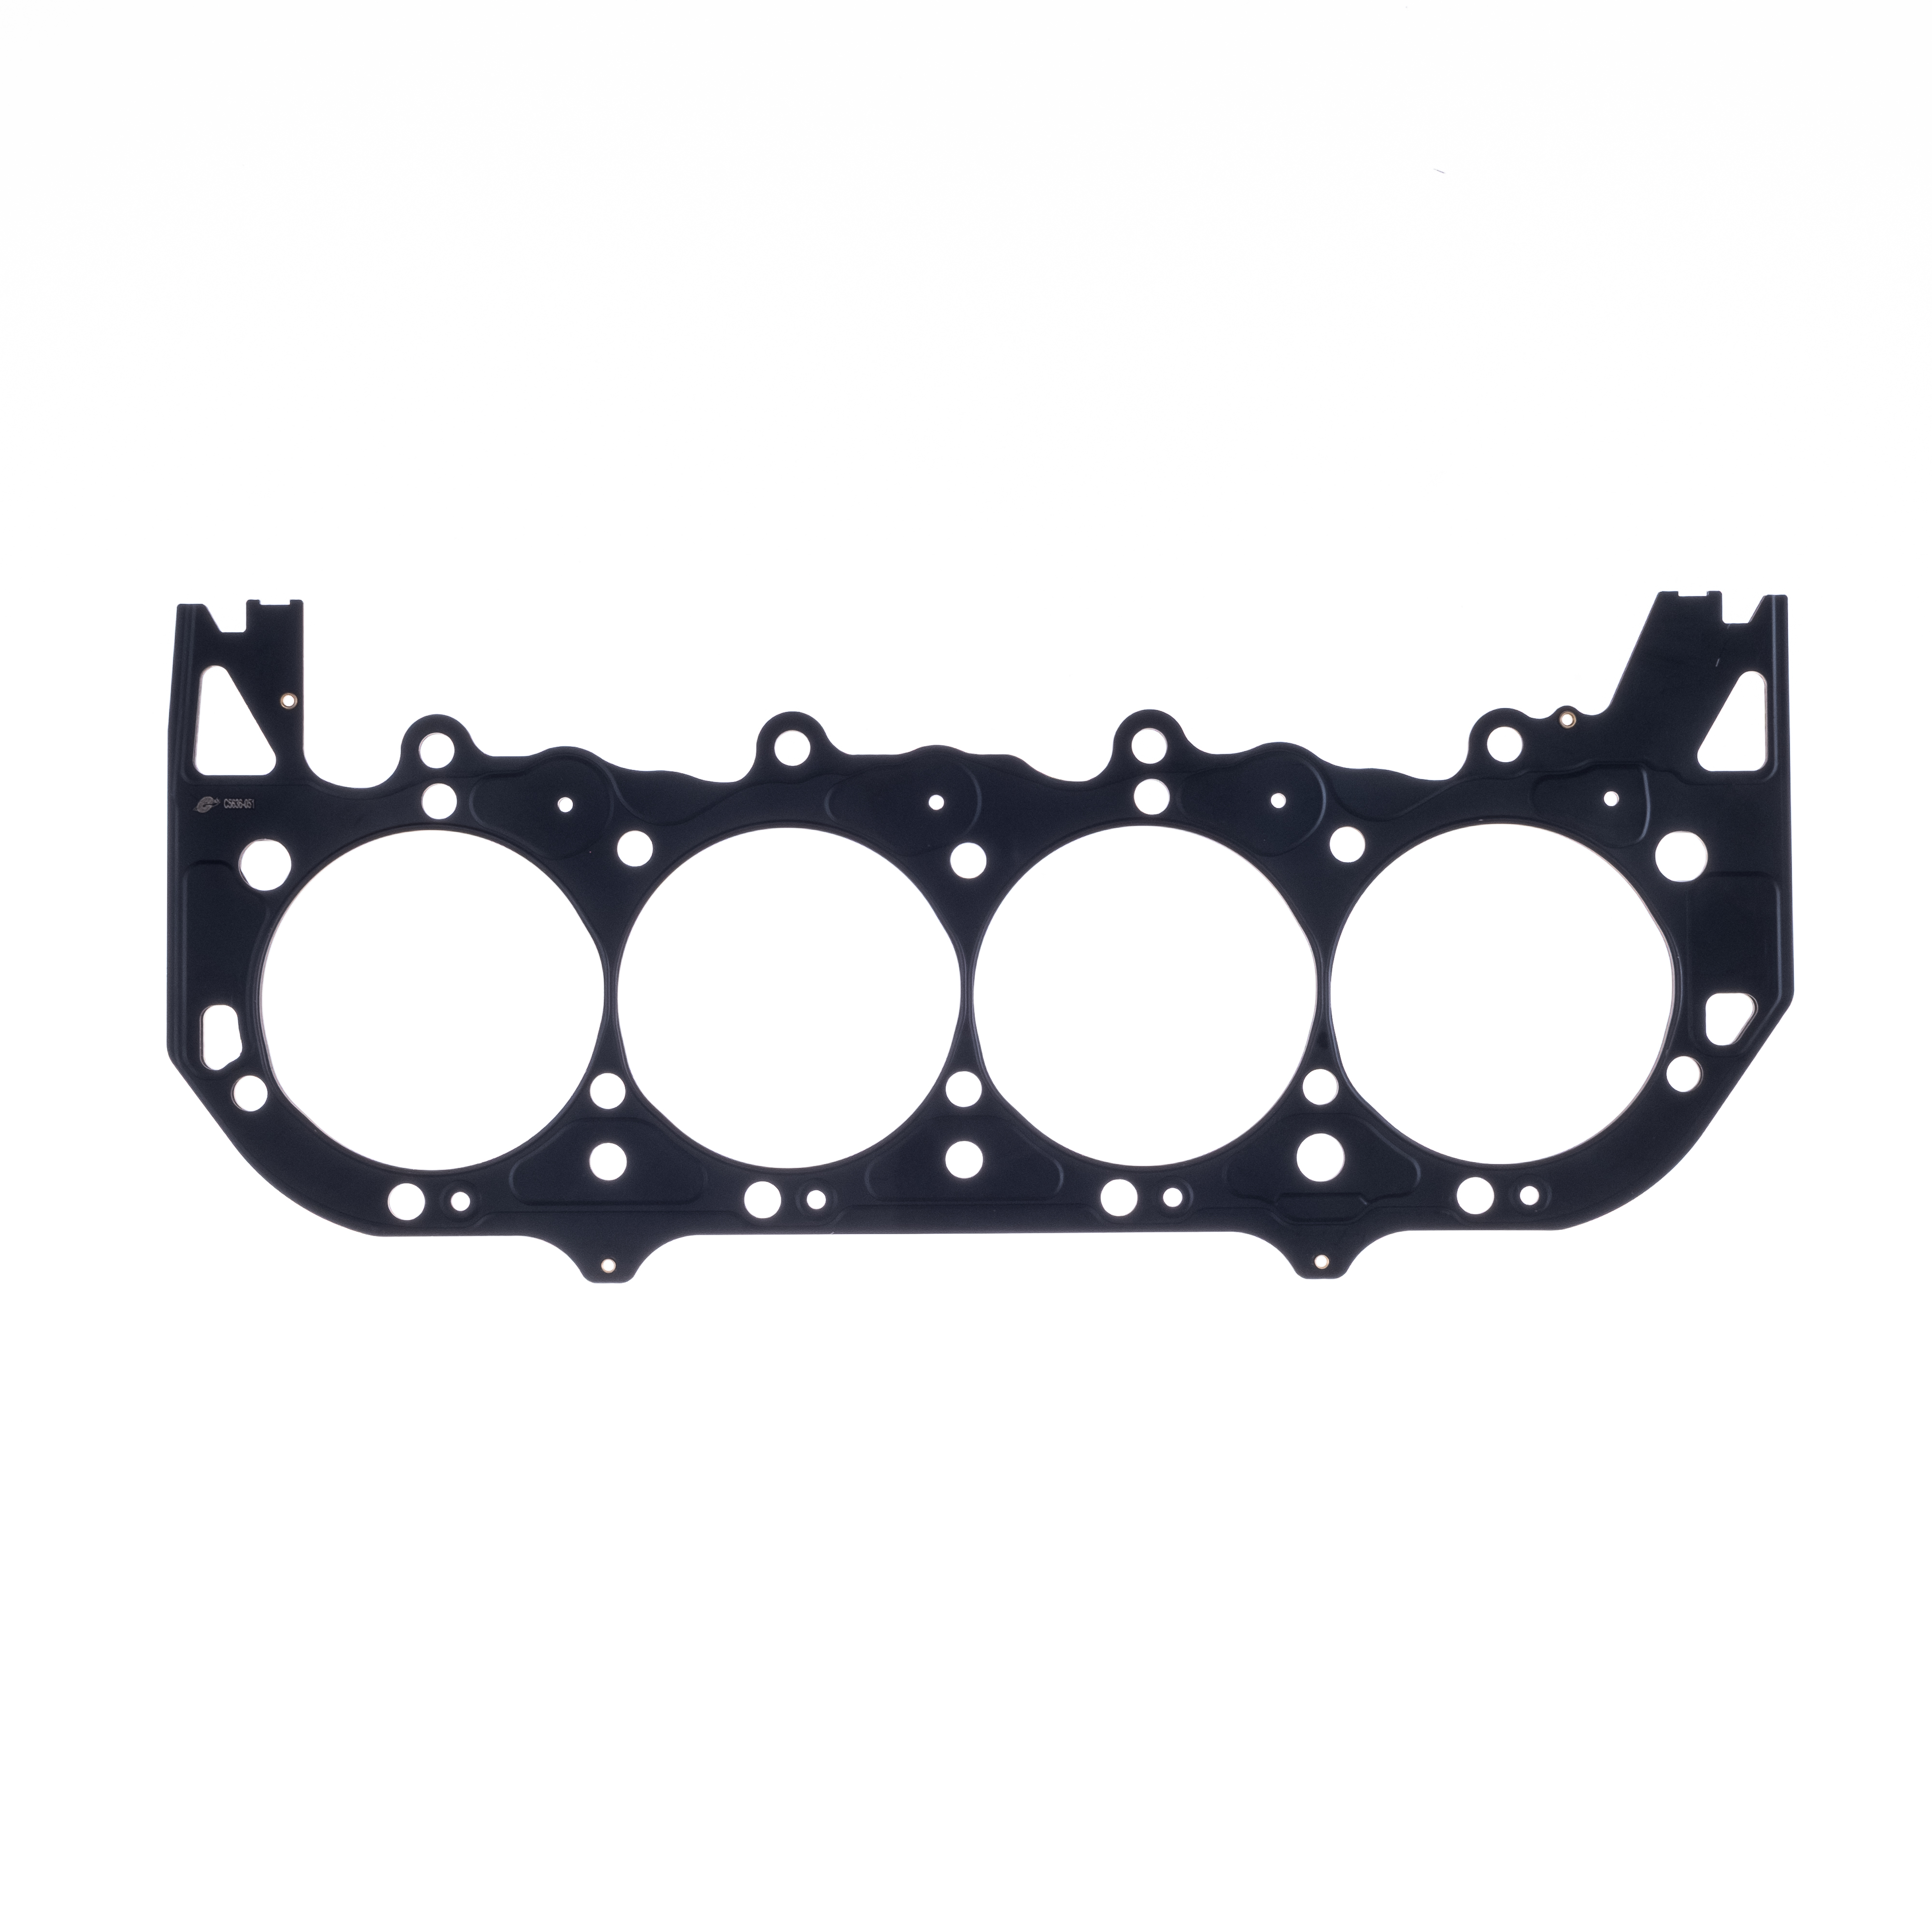 Cometic Gaskets C5636-080 - Cylinder Head Gasket, Marine, 4.580 in Bore, 0.080 in Compression Thickness, Multi-Layer Steel, Big Block Chevy, Each